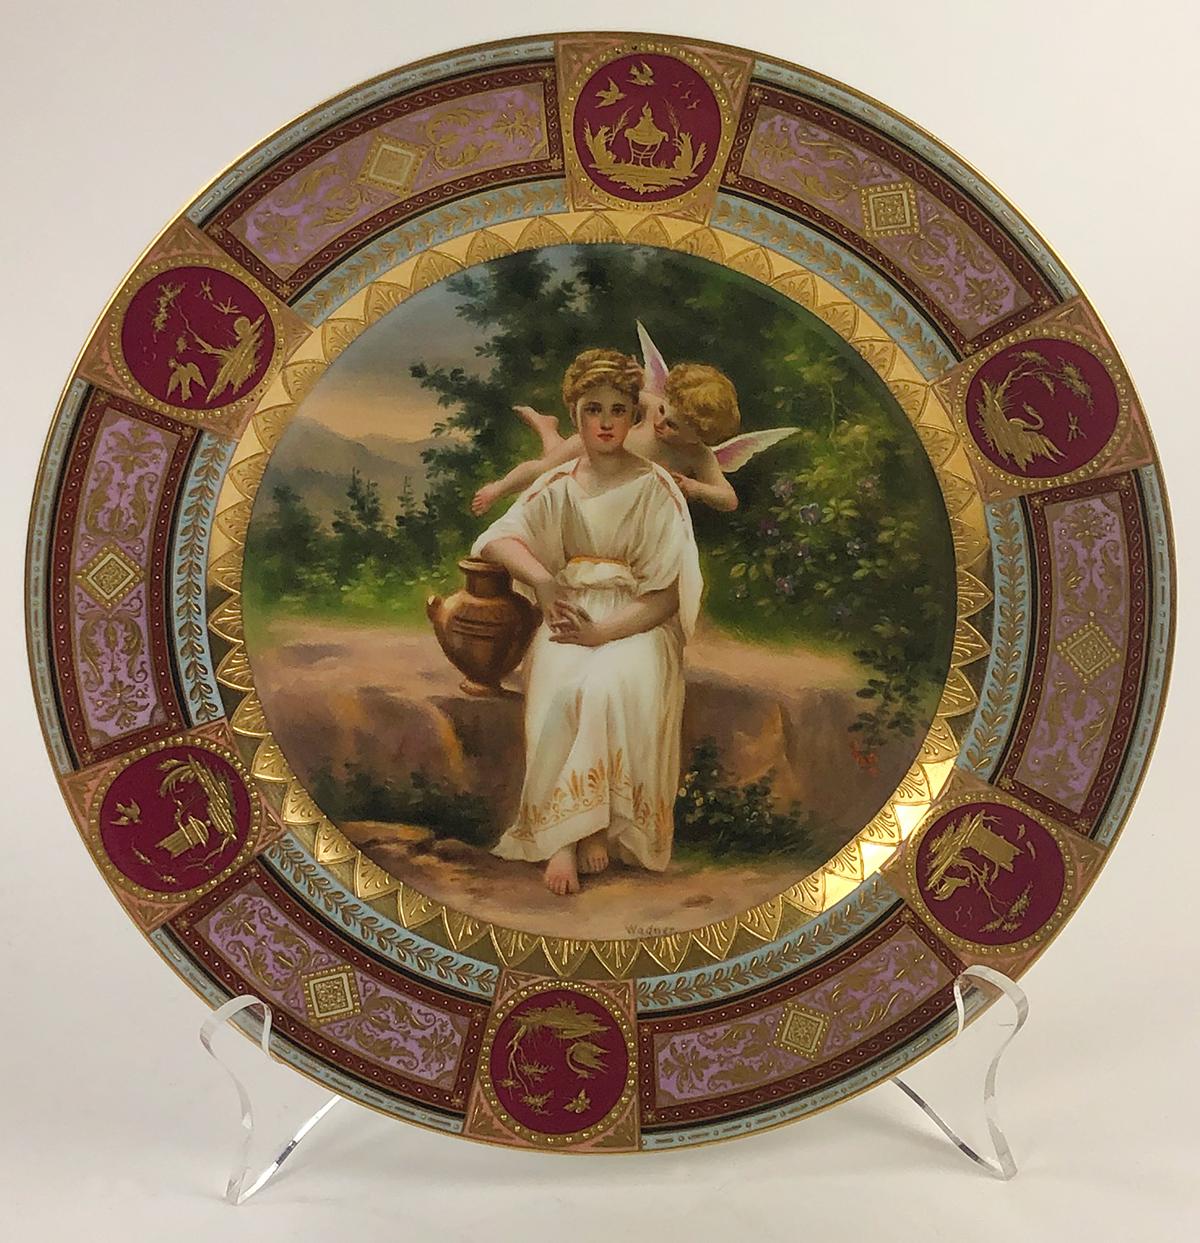 Etched Porcelain Cabinet Plate Featuring a Famous Painting by Adolphe Bouguereau In Excellent Condition For Sale In Dallas, TX